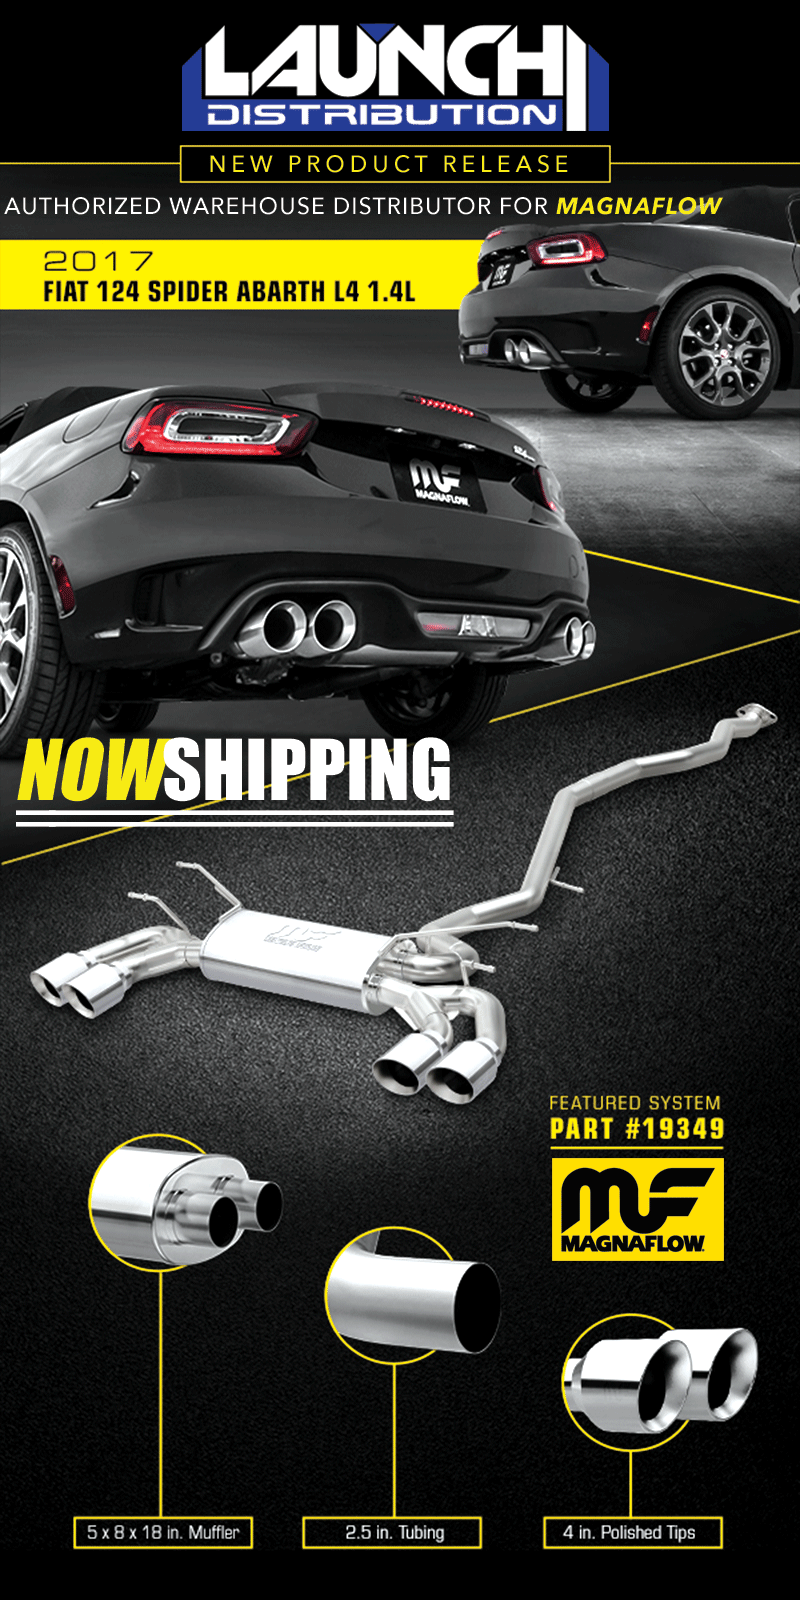 NOW SHIPPING: Magnaflow Stainless Quad Exhaust System for 2017 Fiat 124 Spider Abrath 1.4L